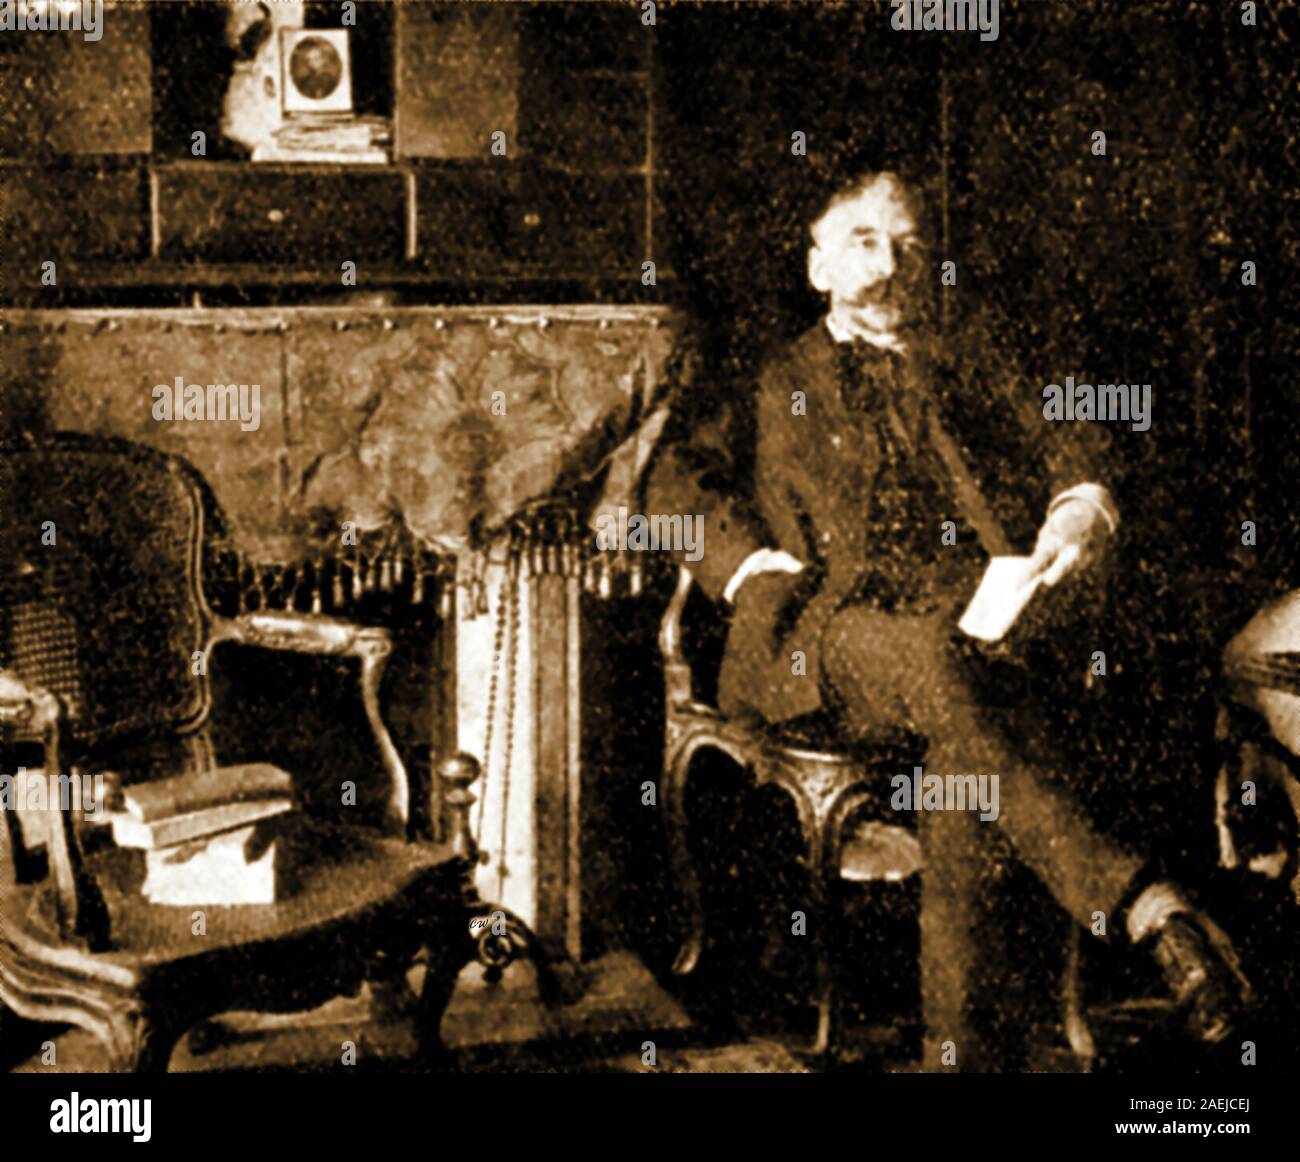 An early printed portrait photograph of  French  writer Stéphane Mallarmé (1842-1898) in his sitting room in Rue de Rome. His major French symbolist poems and other works  anticipated and inspired a number of  revolutionary artistic schools of the early 20th century, including  Dadaism,Cubism, Futurism, and Surrealism. His real name was Étienne Mallarmé, Many consider his works are the most difficult to translate into English because of his use of phonetic ambiguities that only occur in French. Stock Photo